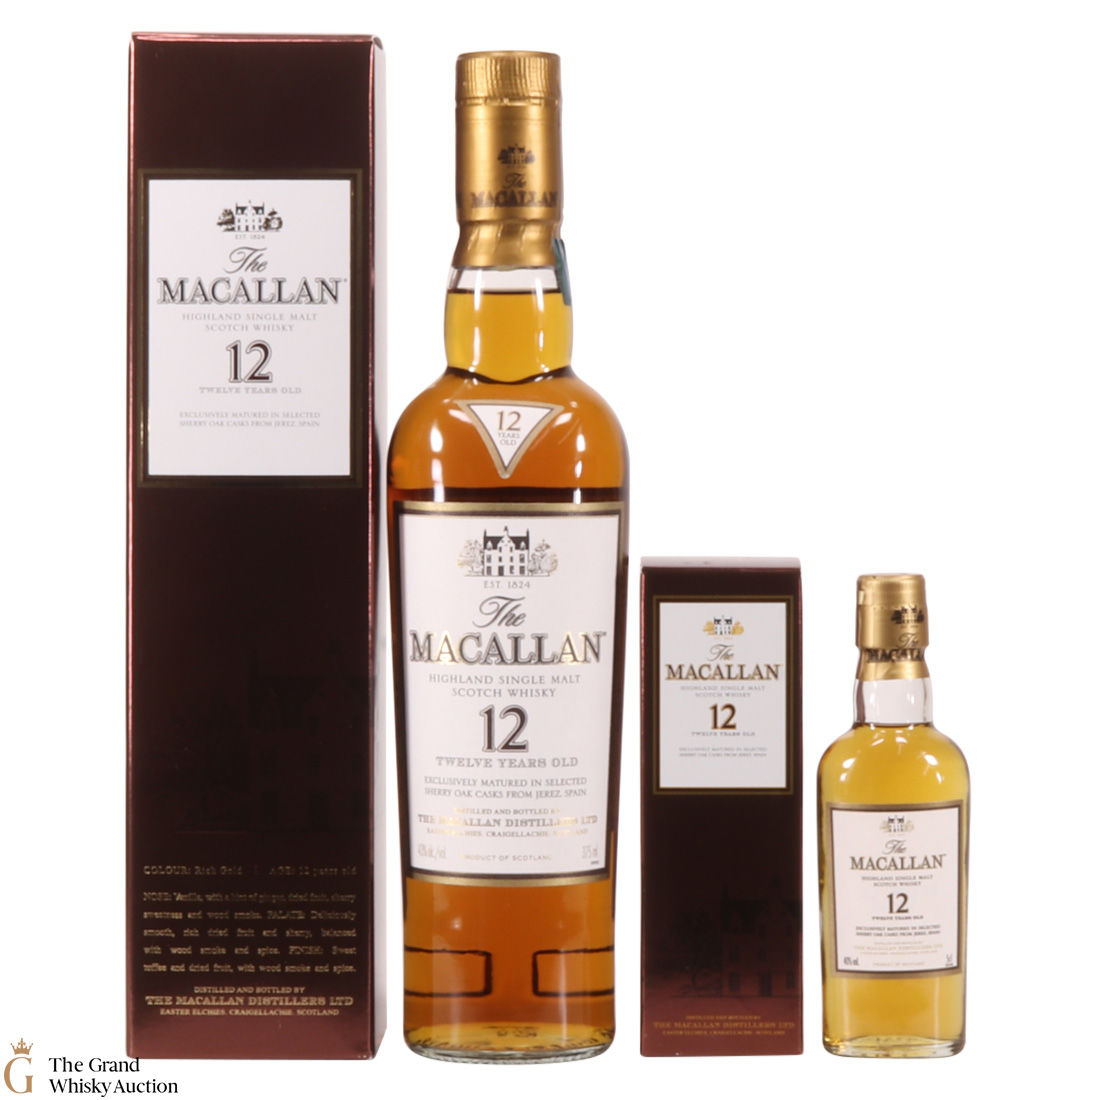 Macallan 12 Year Old 375ml 50ml Auction The Grand Whisky Auction